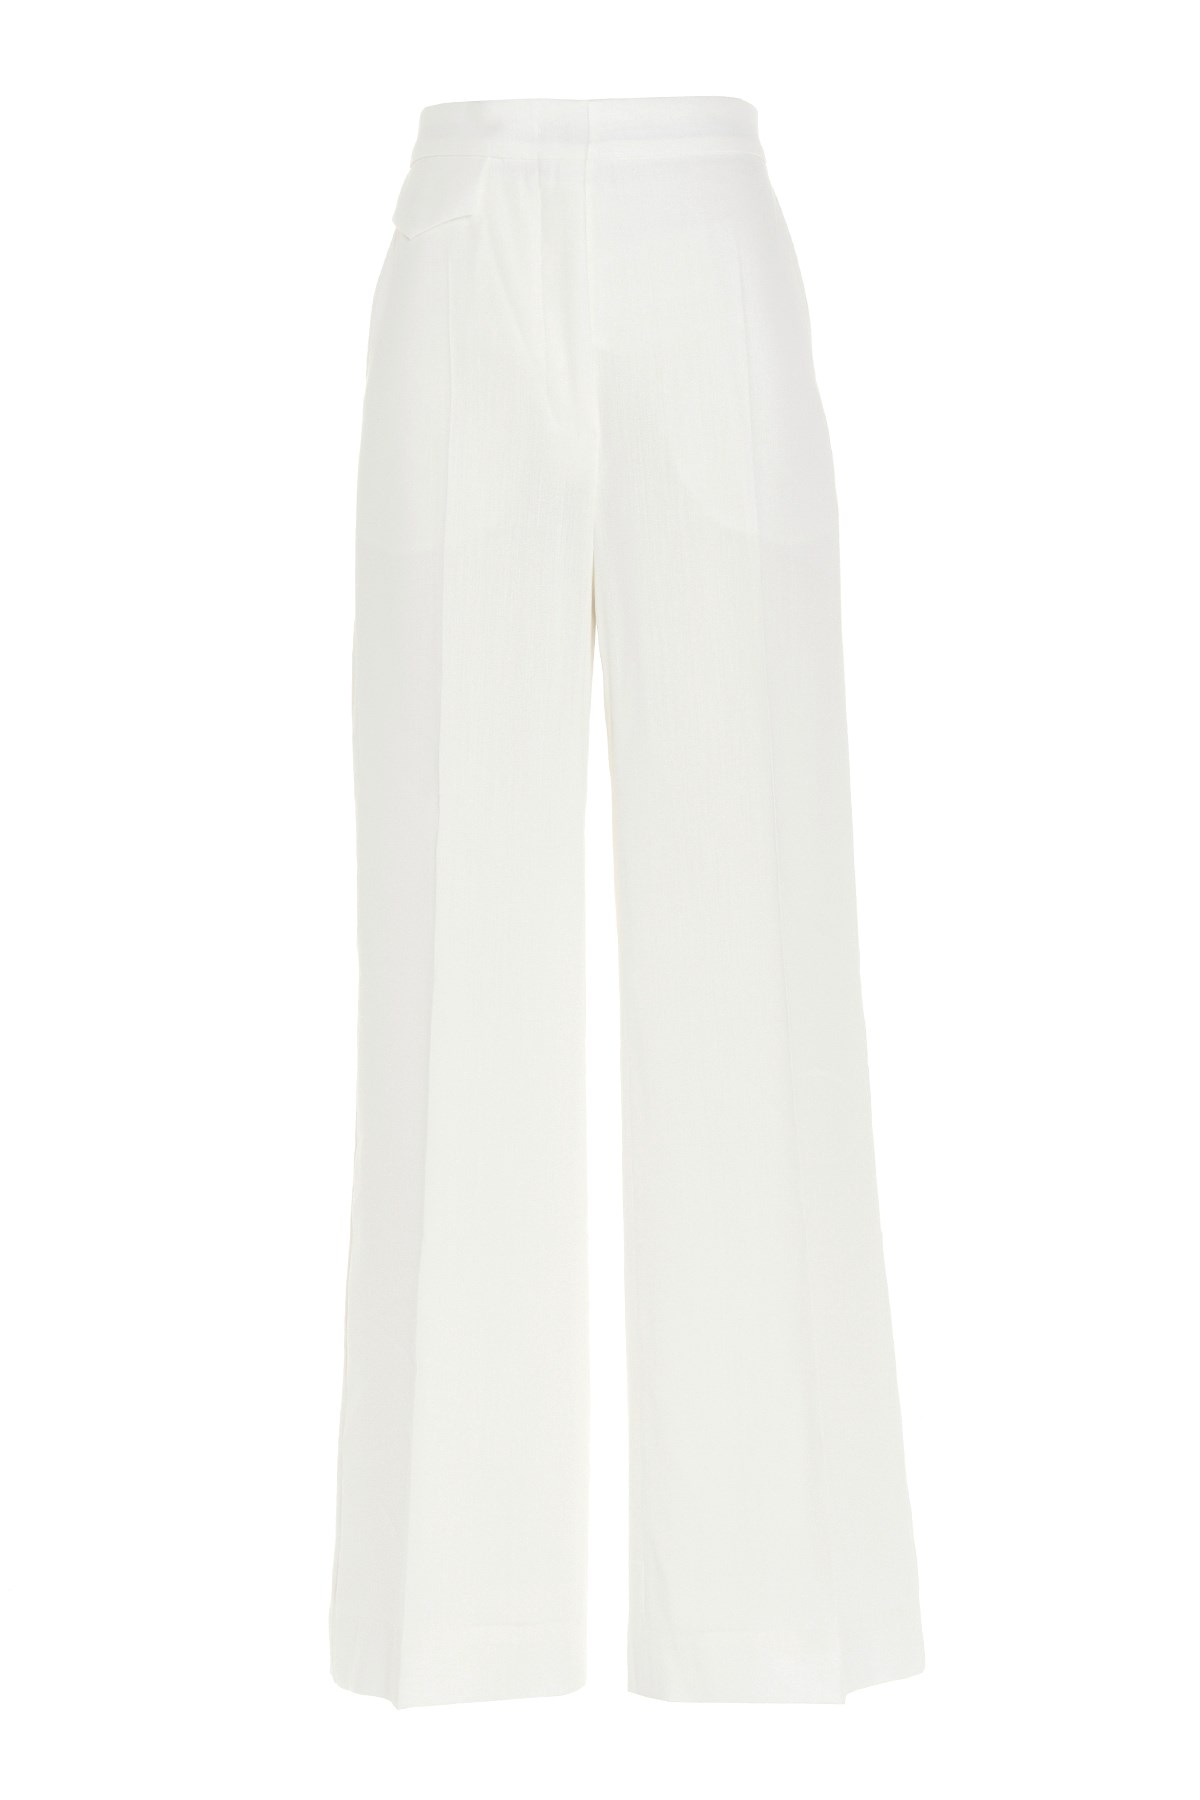 SPORTMAX 'Clarion' Trousers